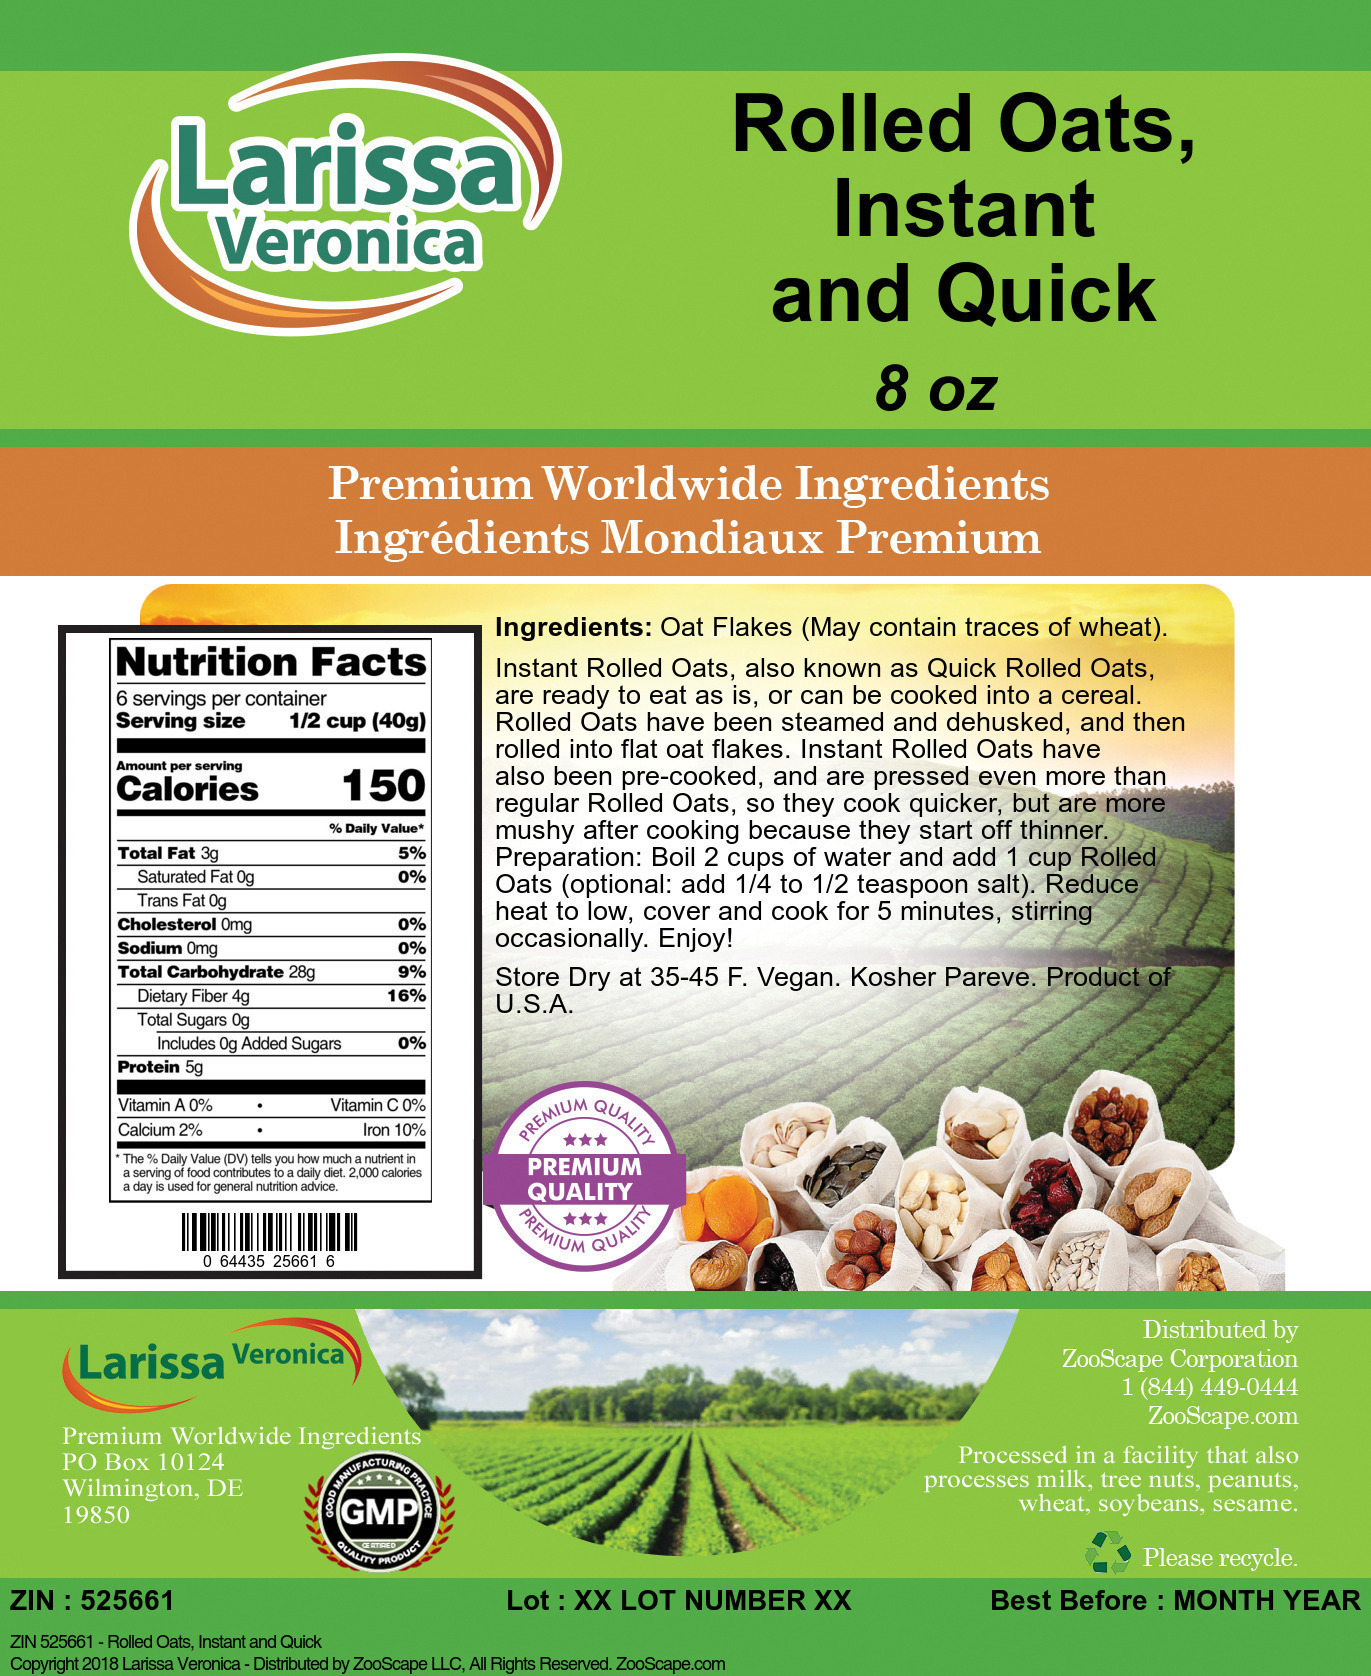 Rolled Oats, Instant and Quick - Label